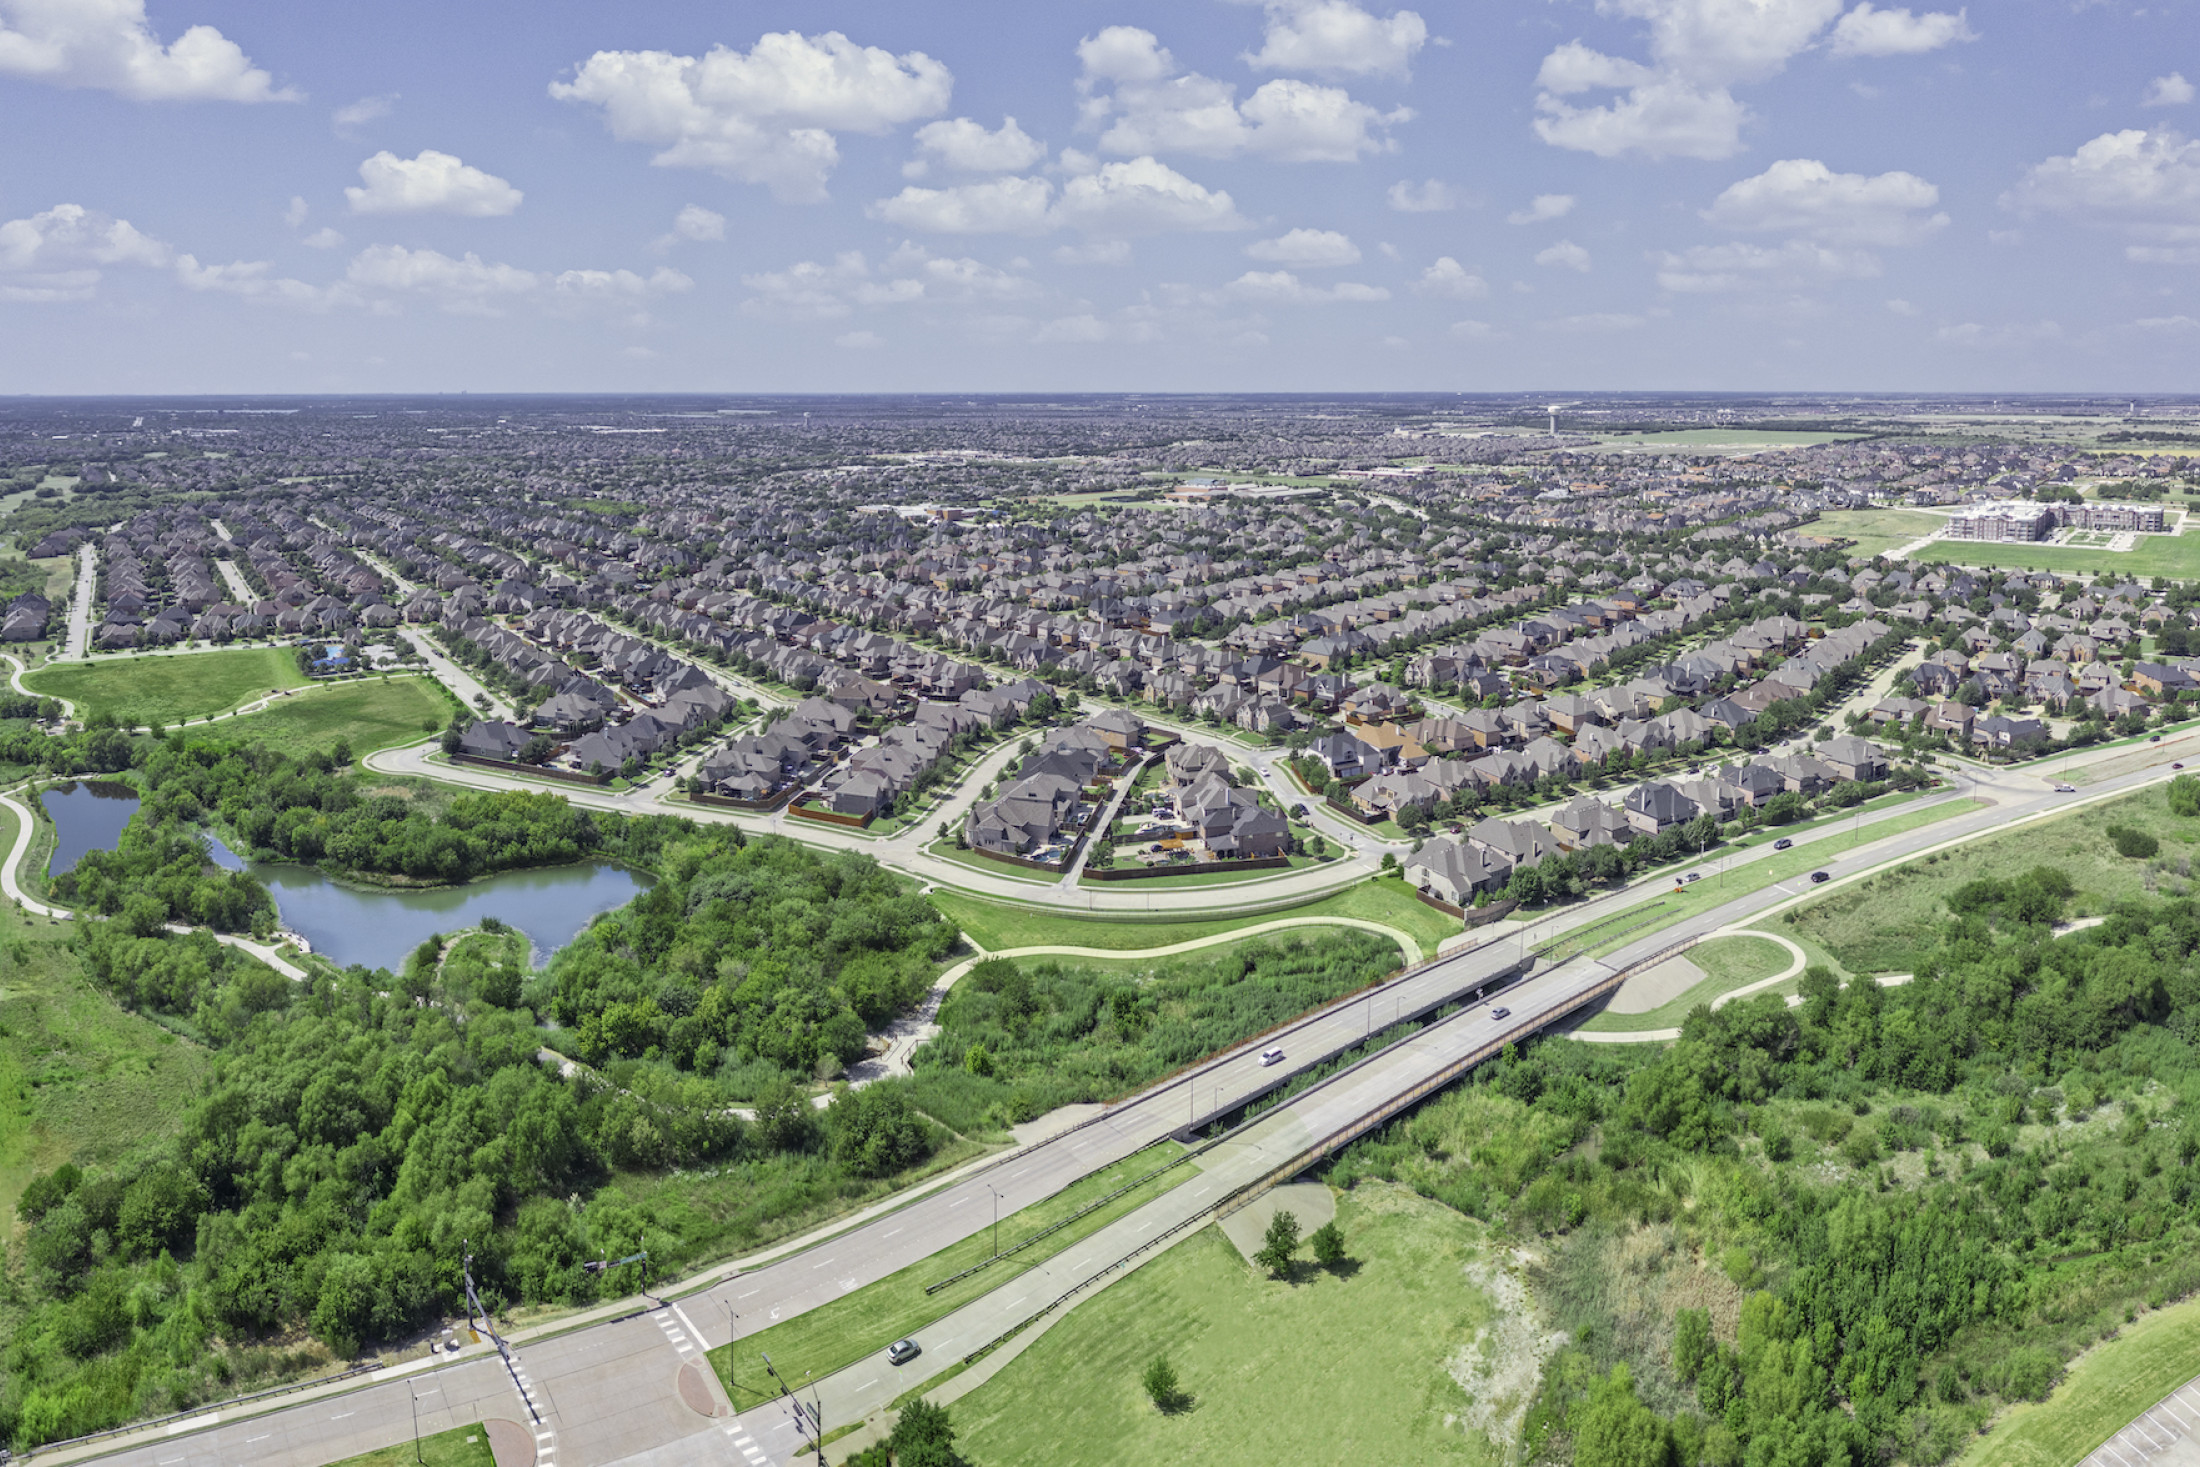 Aerial photo of a large residential neighborhood and and park with bright green grass and walking paths.